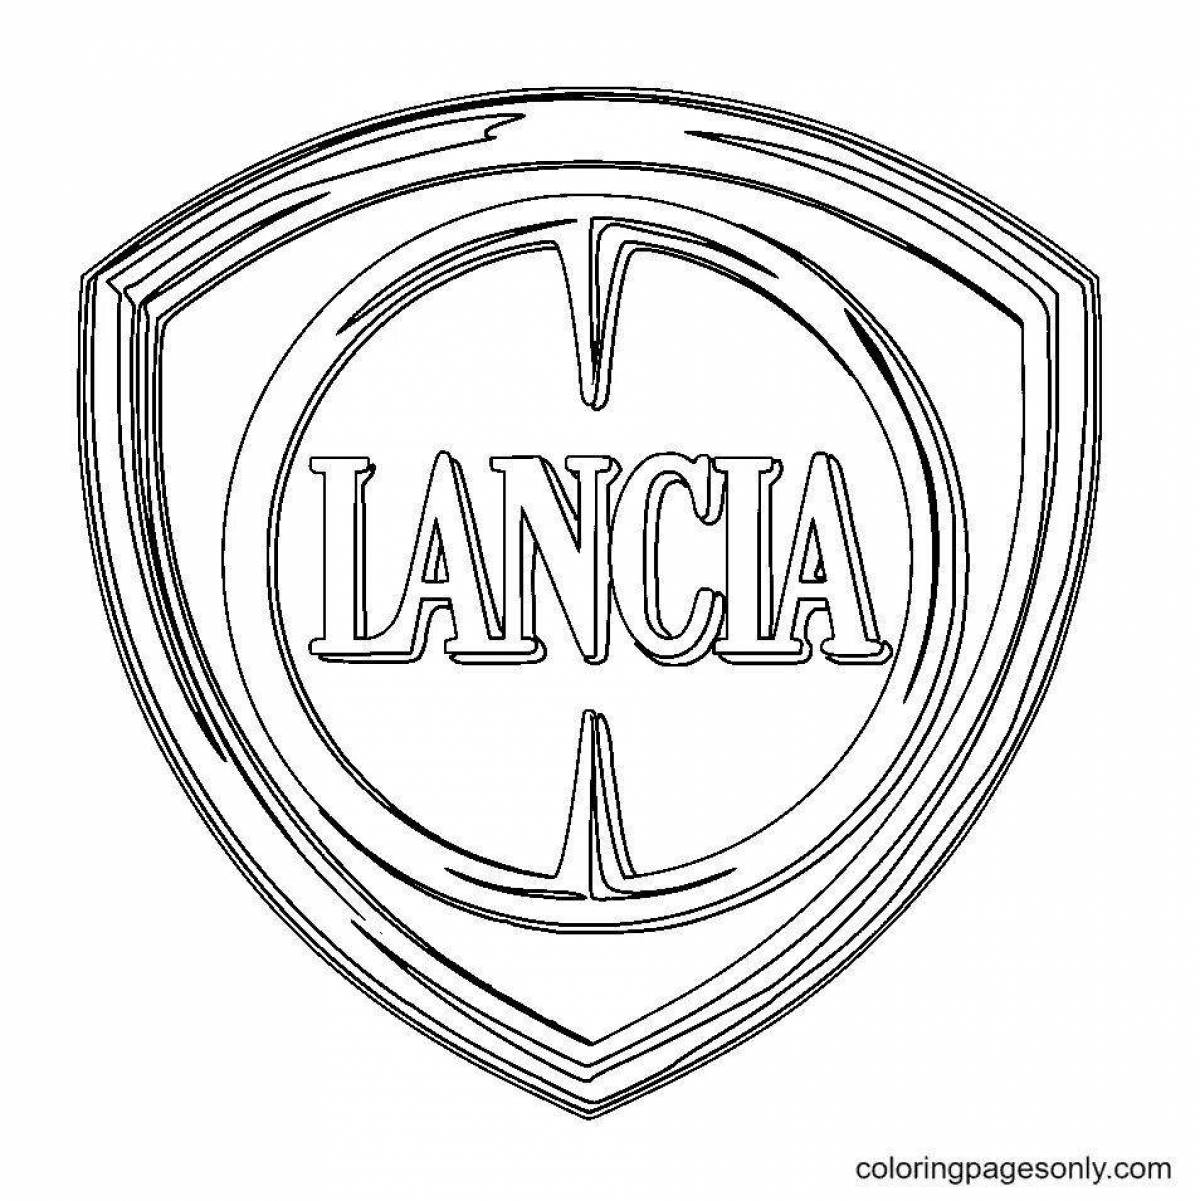 Large car sign coloring page